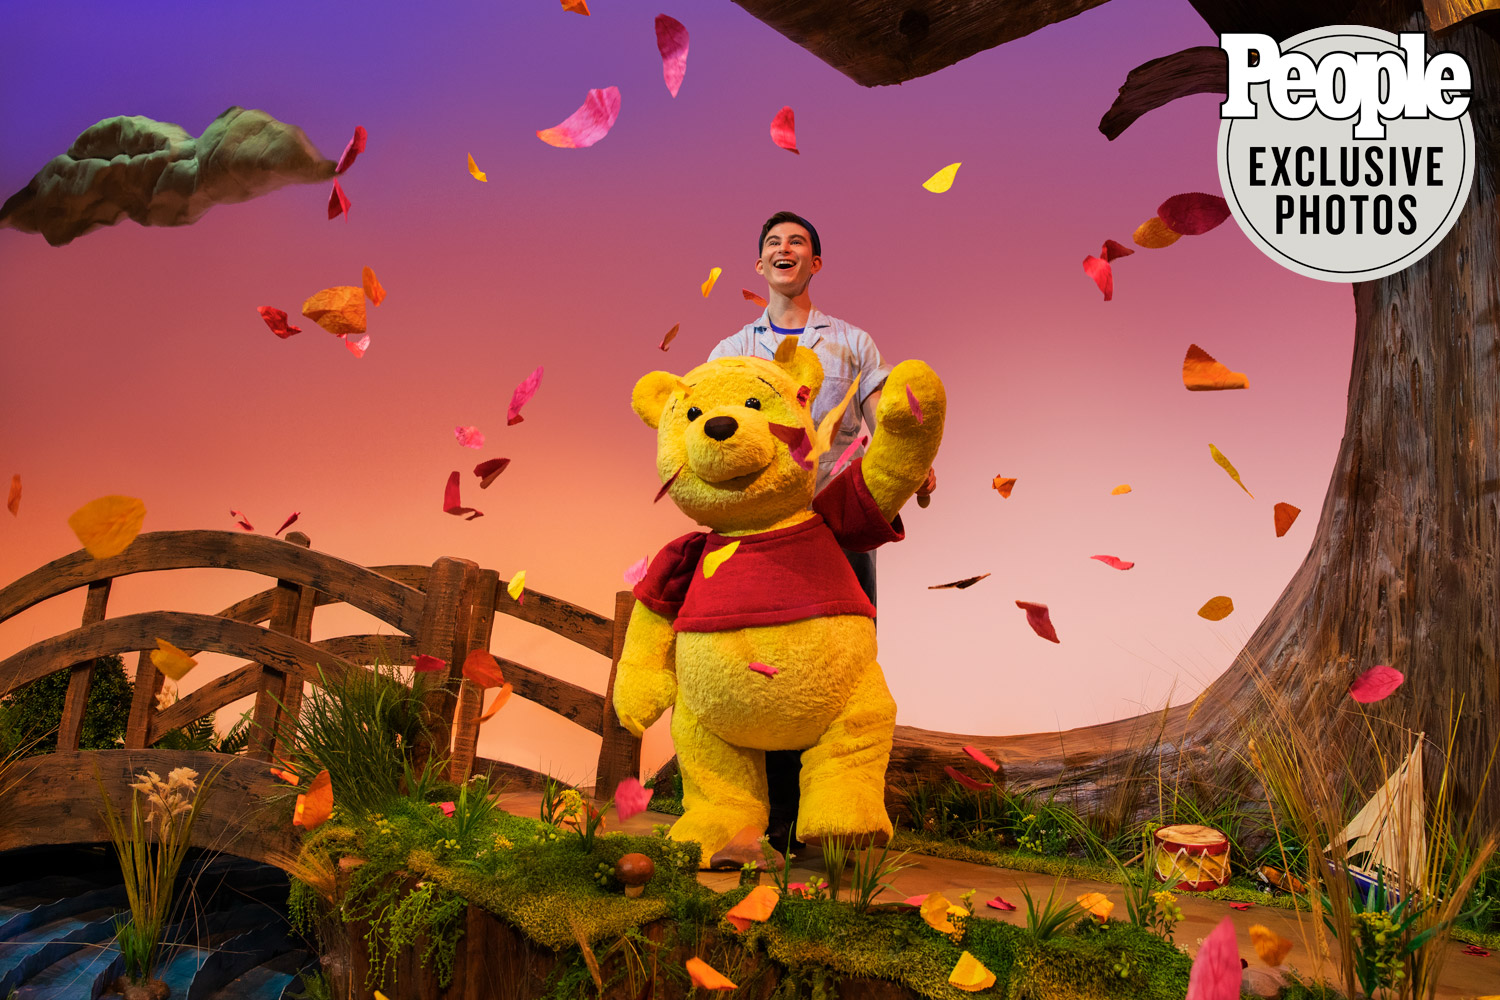 Winnie the Pooh and the Honey Tree: Did You Know? - D23